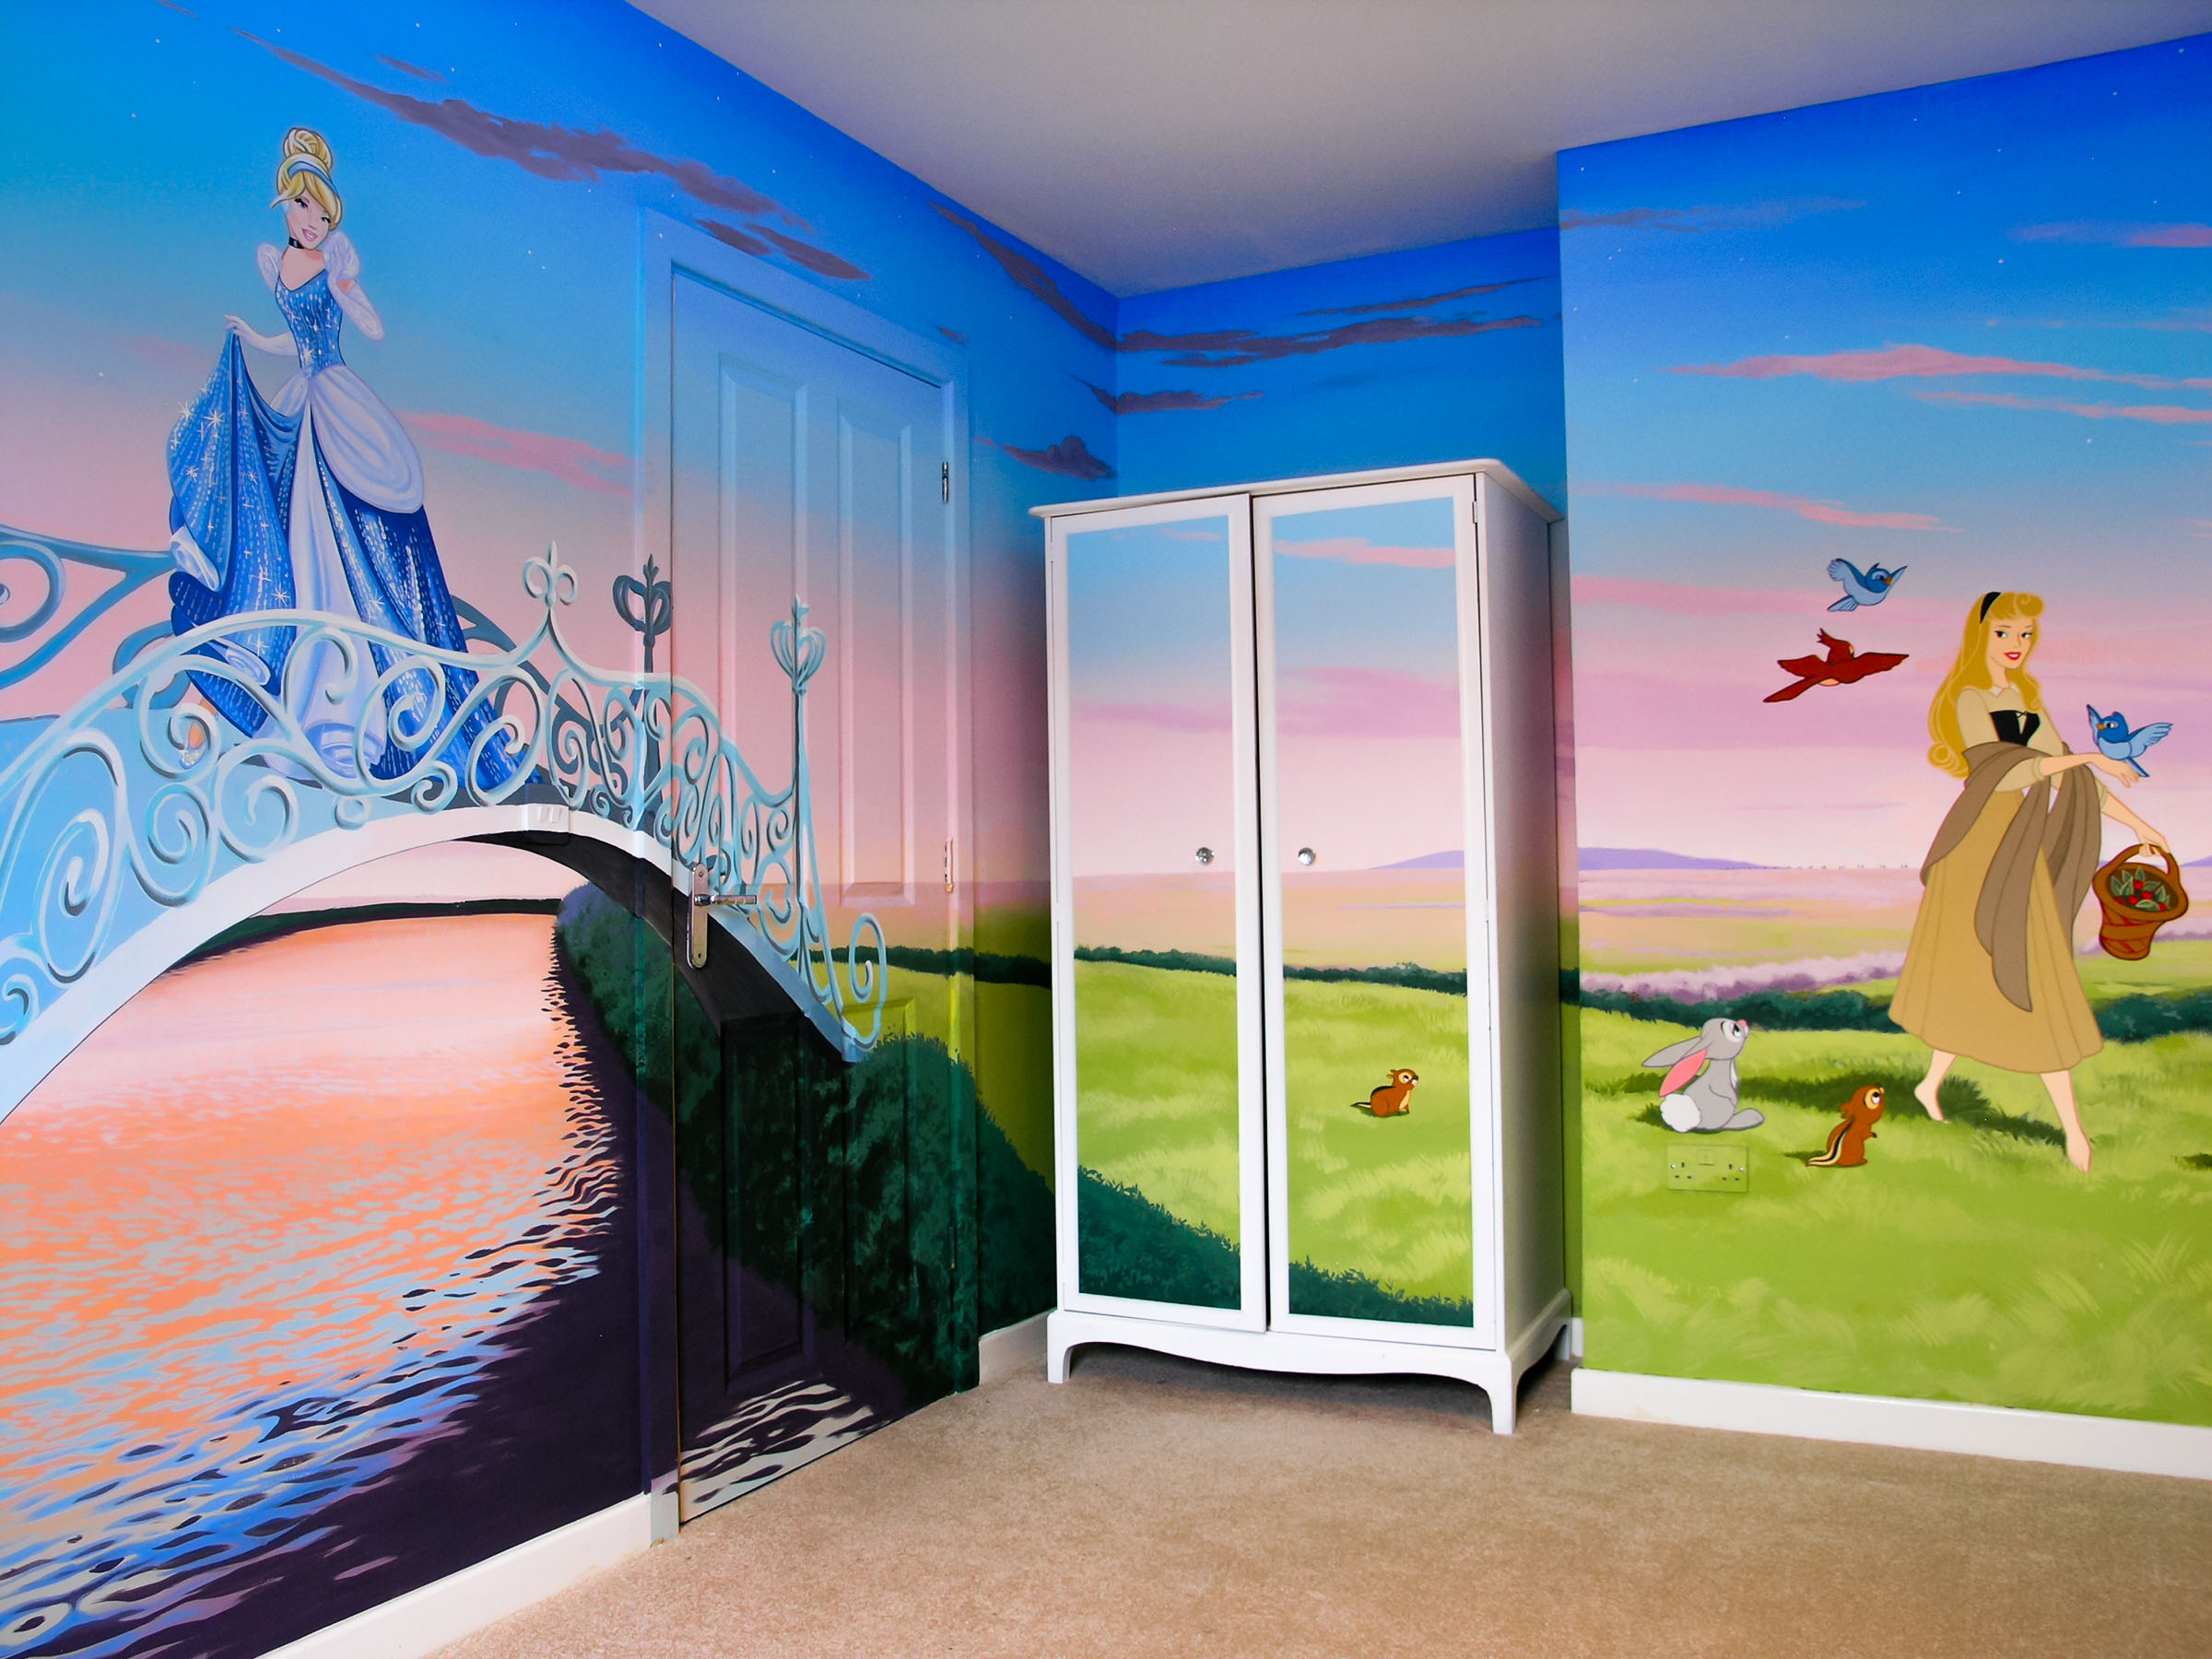 Disney Bedroom Mural with matching wardrobe, hand-painted and varnished for protection